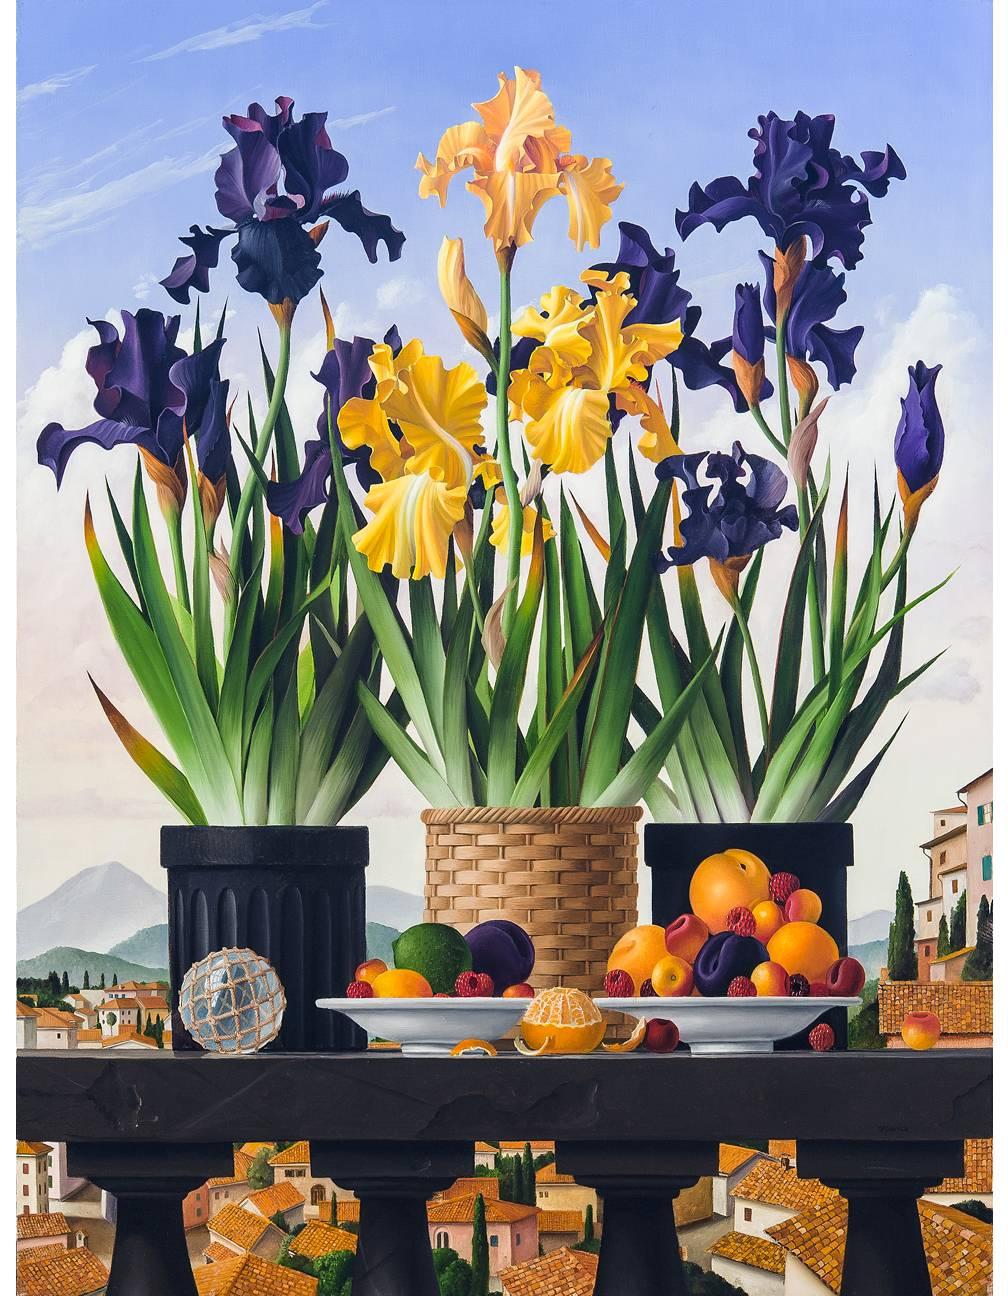 Three Pots of Iris - Painting by James Aponovich